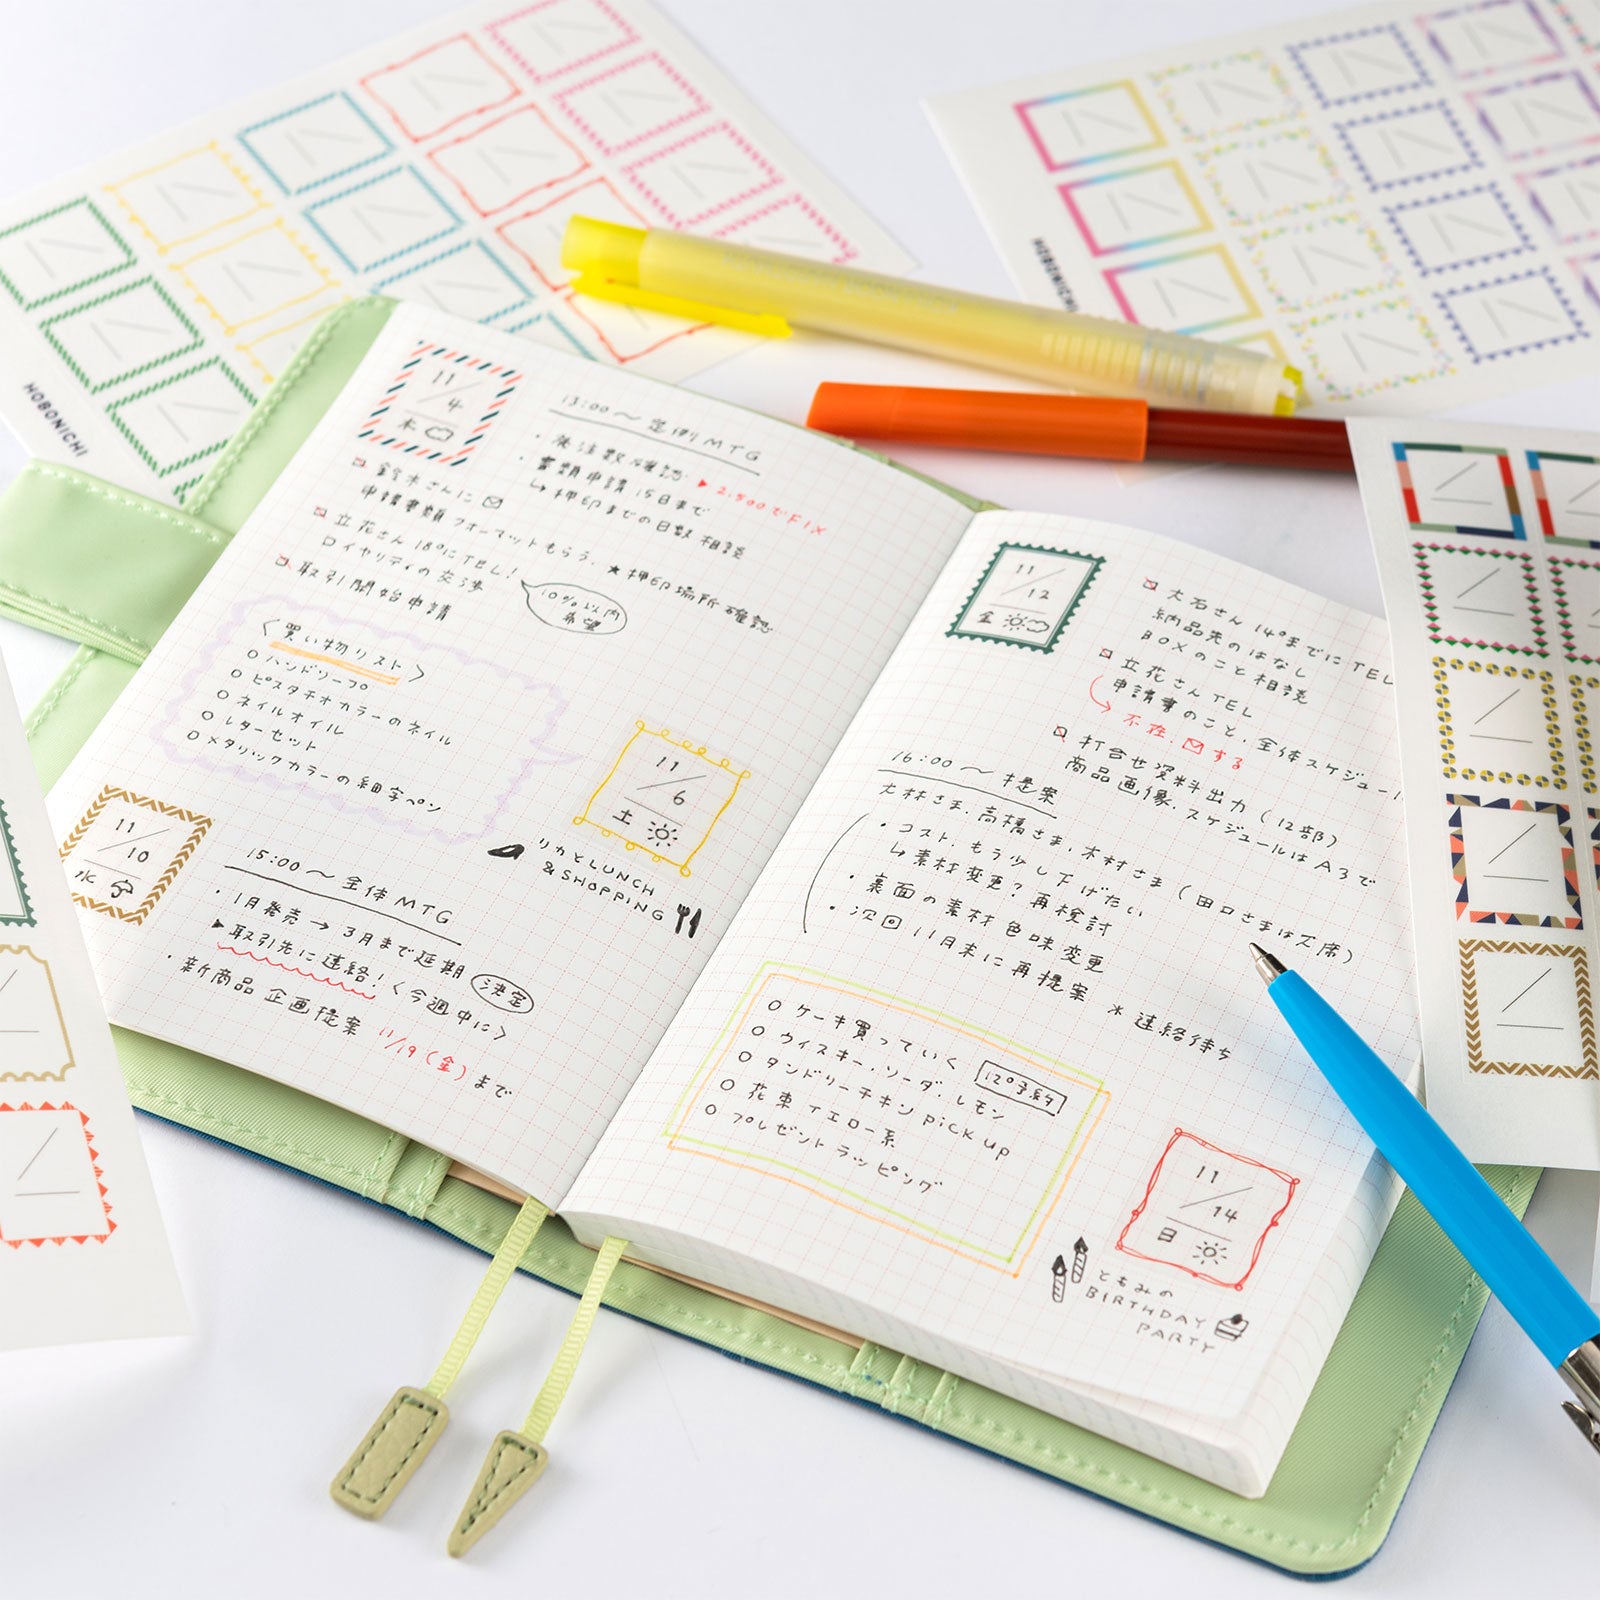 Hobonichi Frame Seal For Dates Stickers This set of frame stickers will cutely decorate the dates when pasted in the memo pages or the graph-ruled pages of the Day-Free Hobonichi.